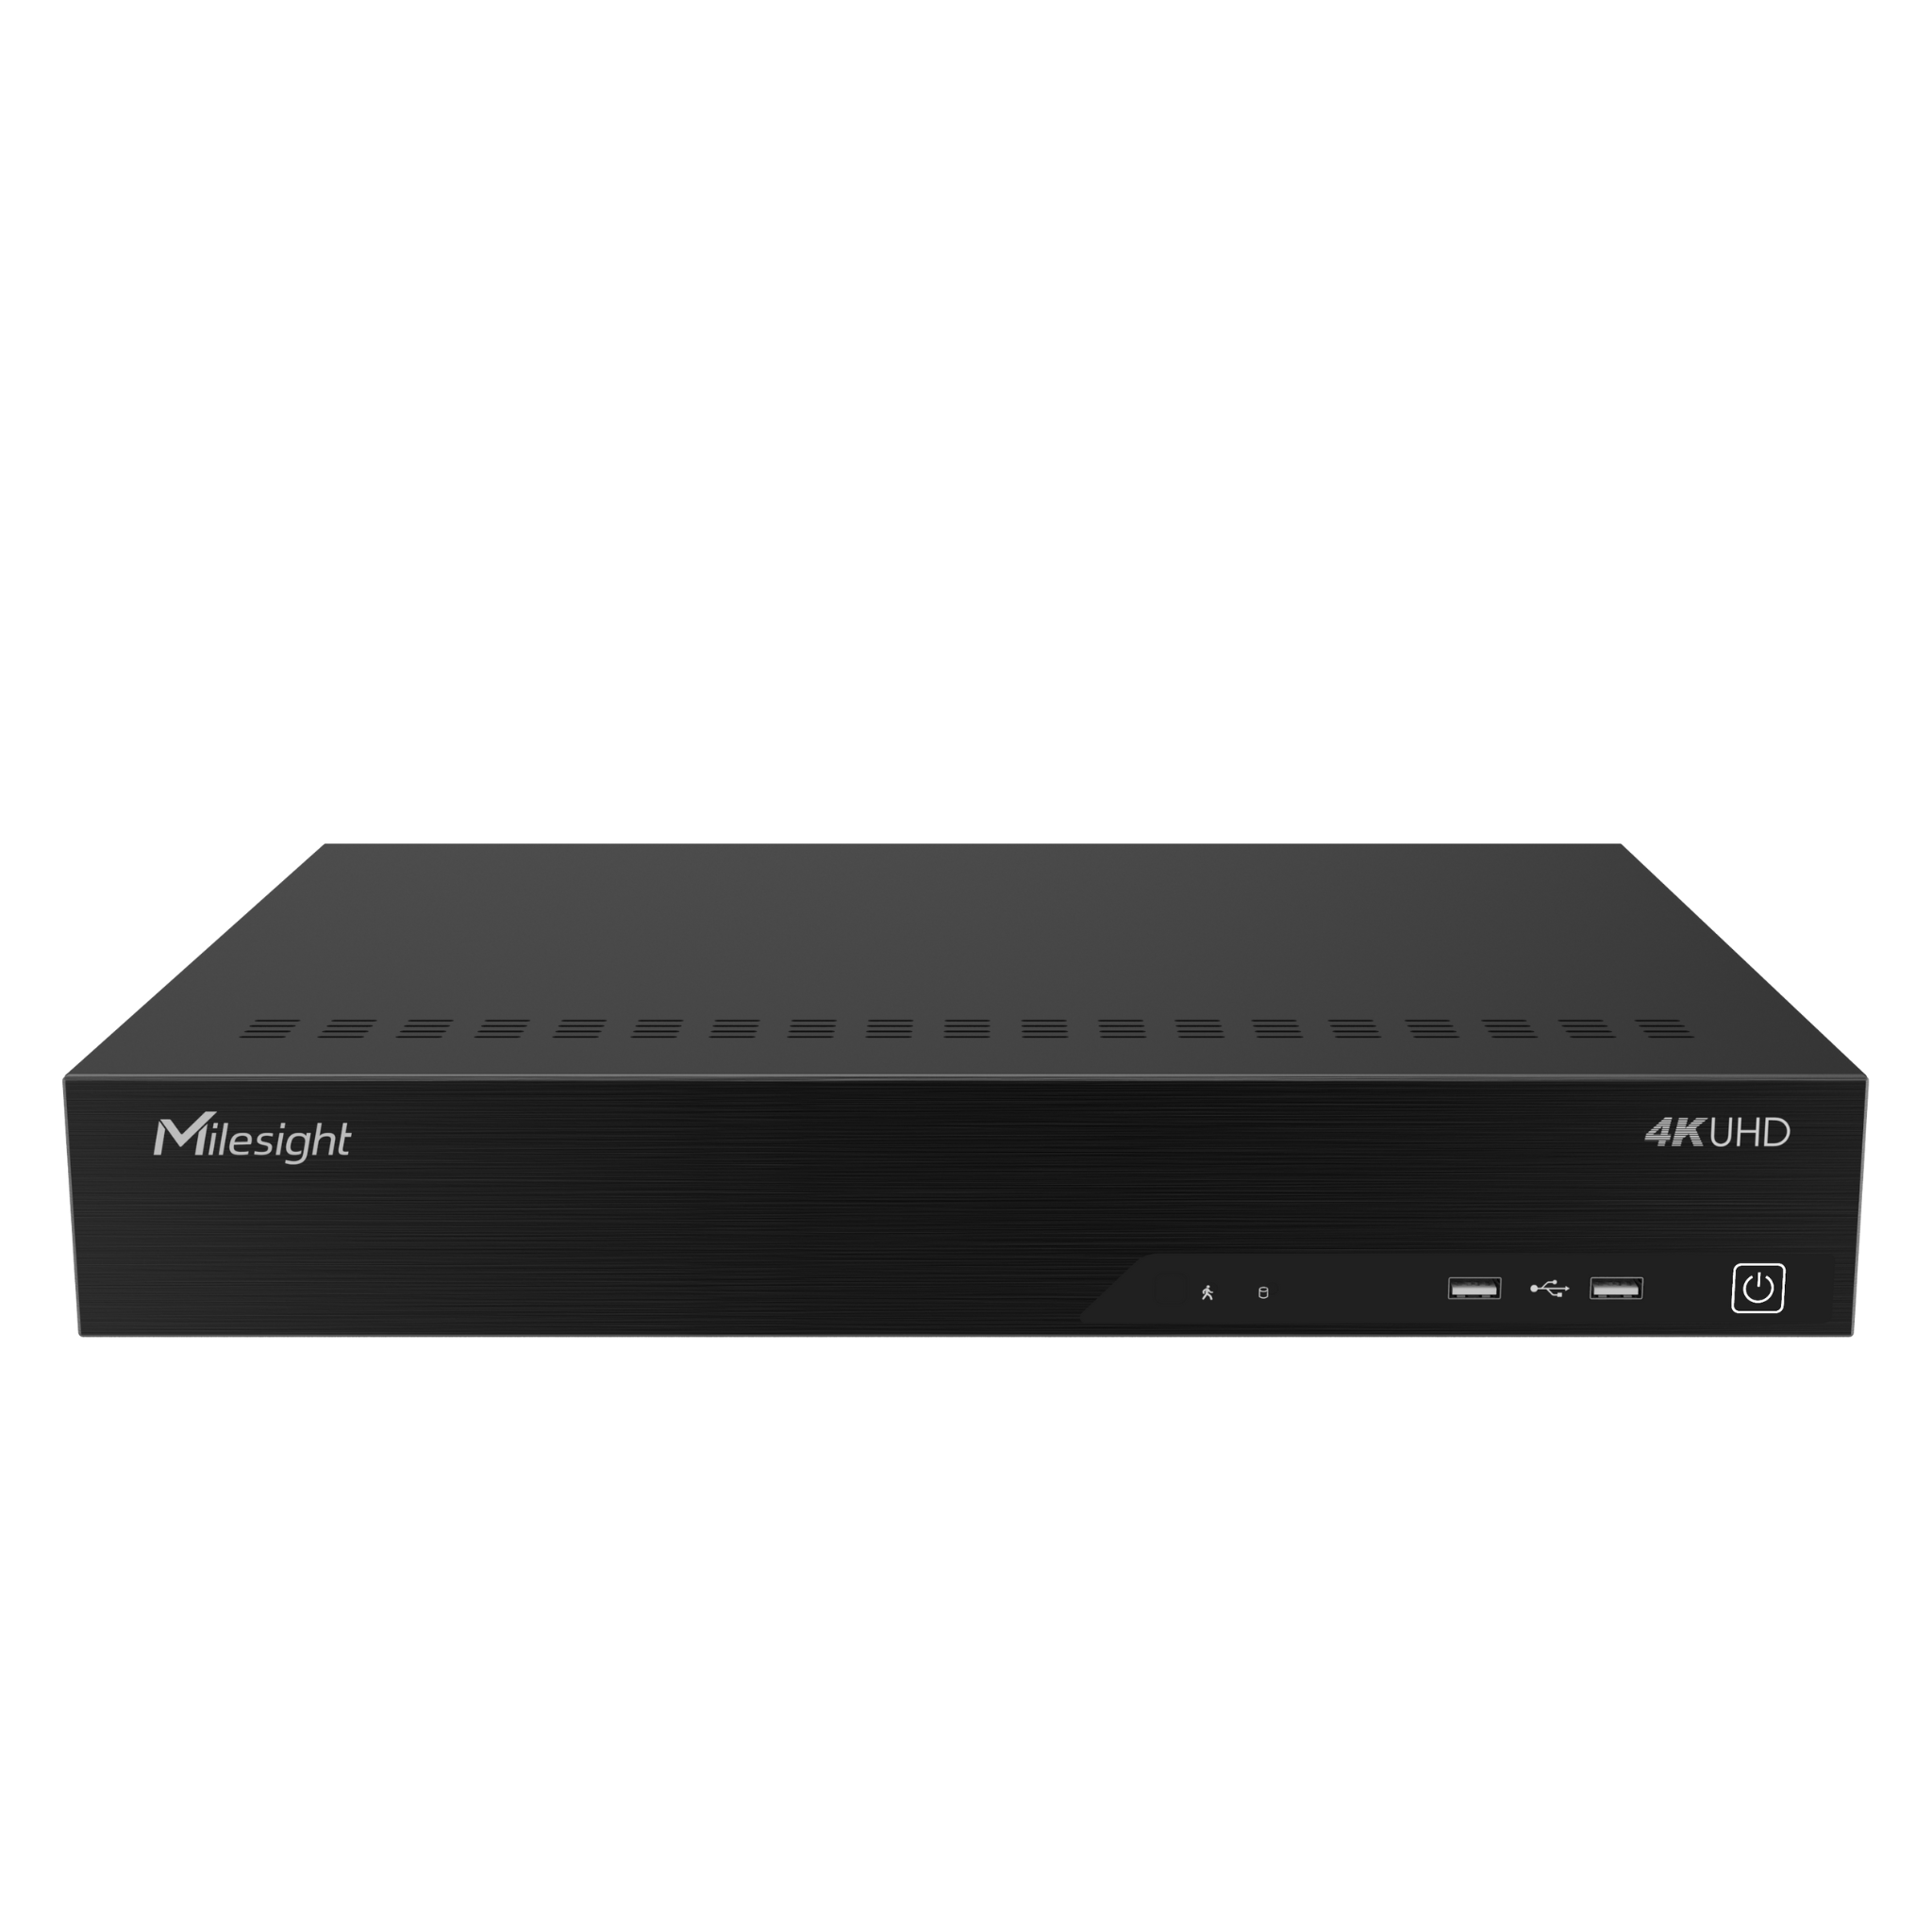 48-Channel NVR with 24 POE Ports HDMI, RAID Support, POS Integration, and Up to 4*10TB Storage